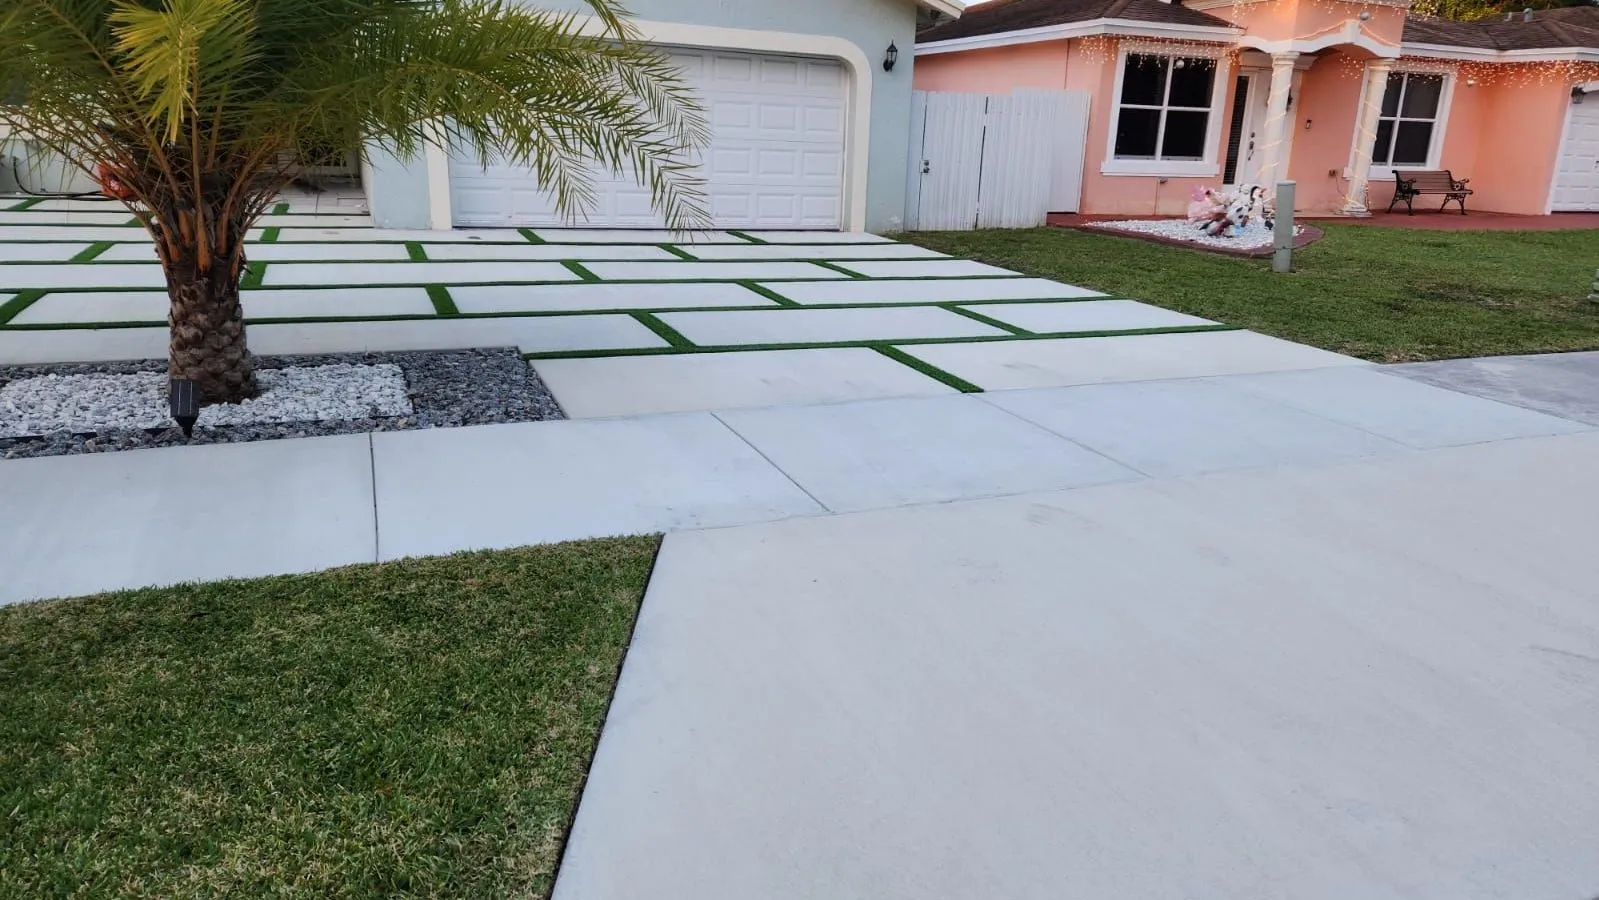 turf installed between concrete pavers to create a unique and modern driveway in Miami, FL